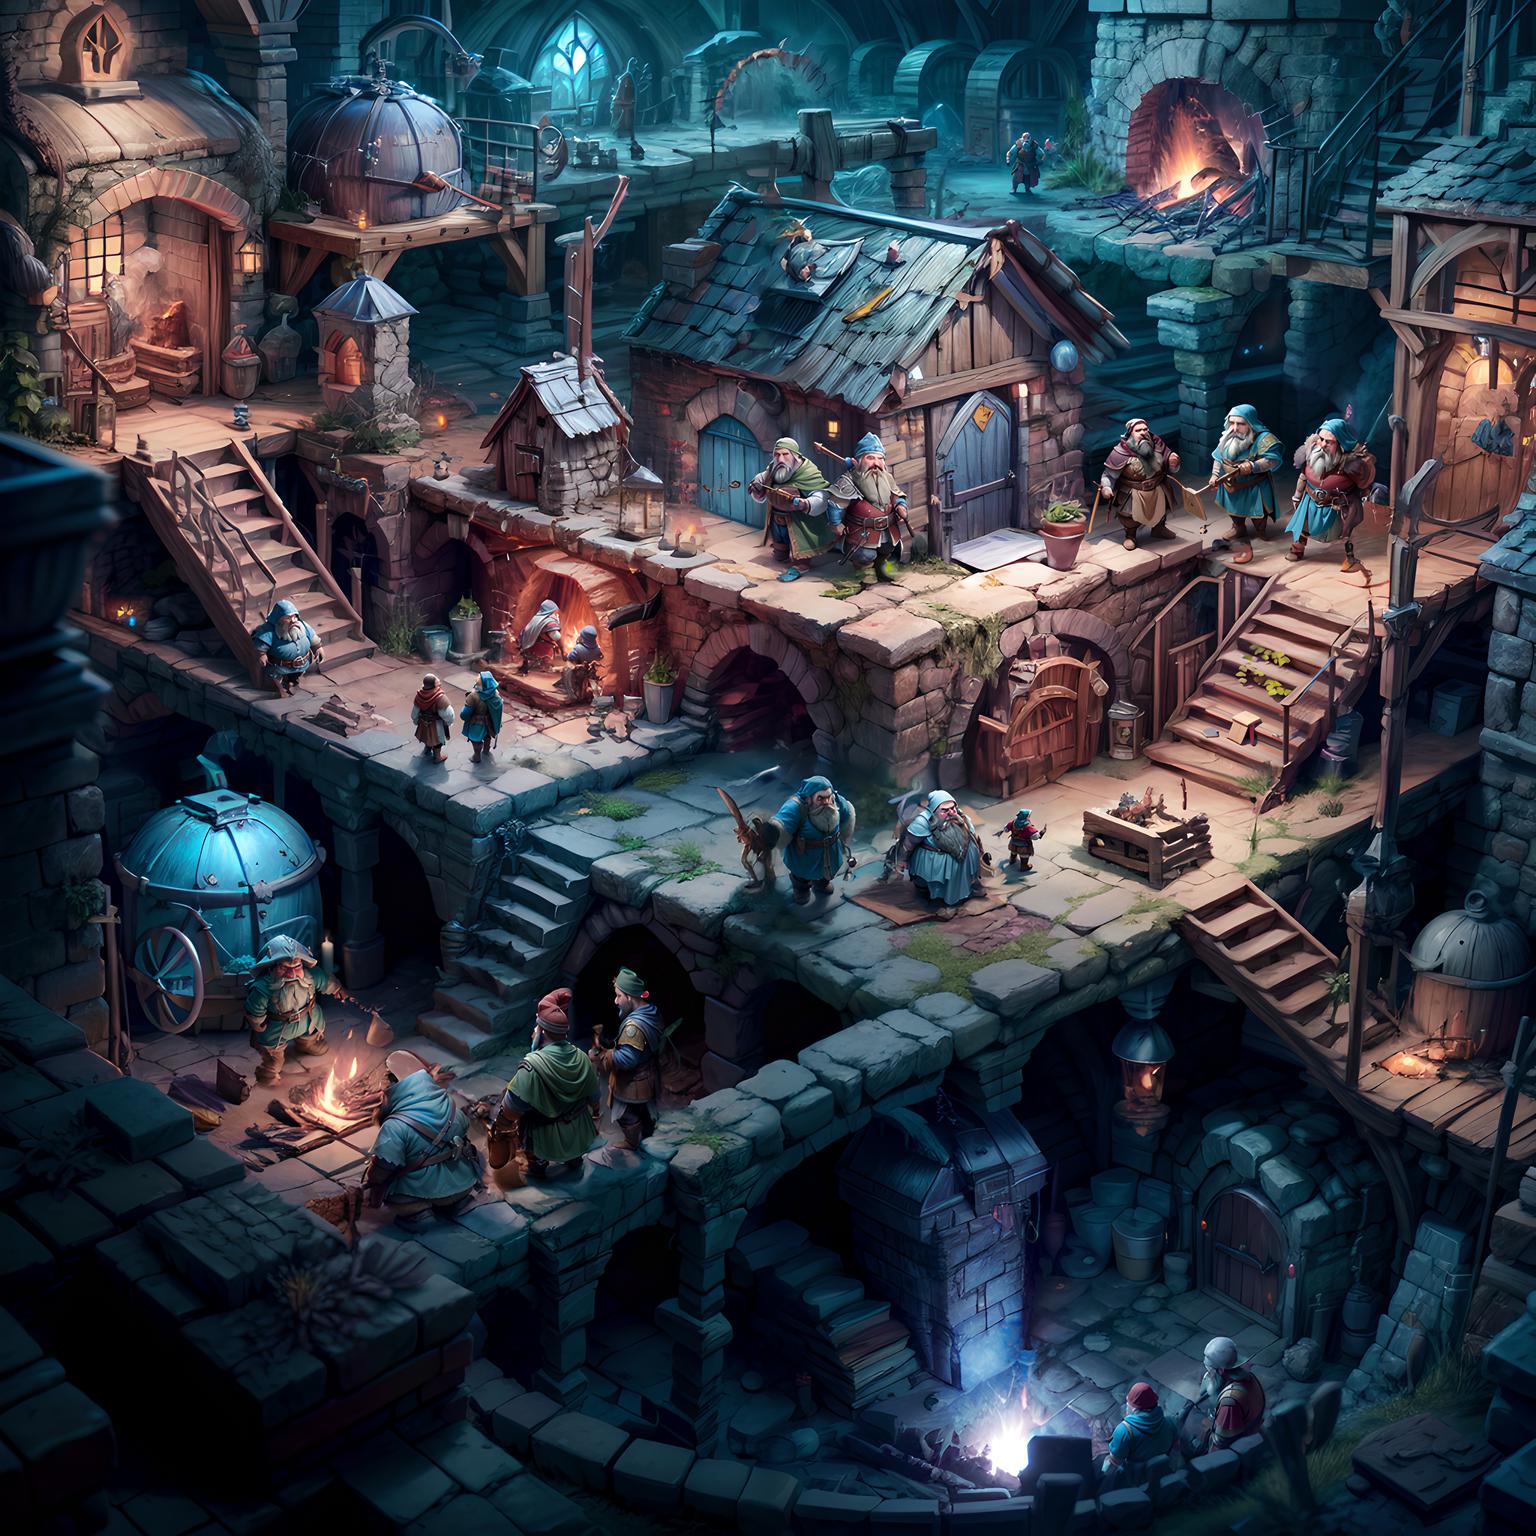 A beautifully illustrated fantasy village with people and animals.